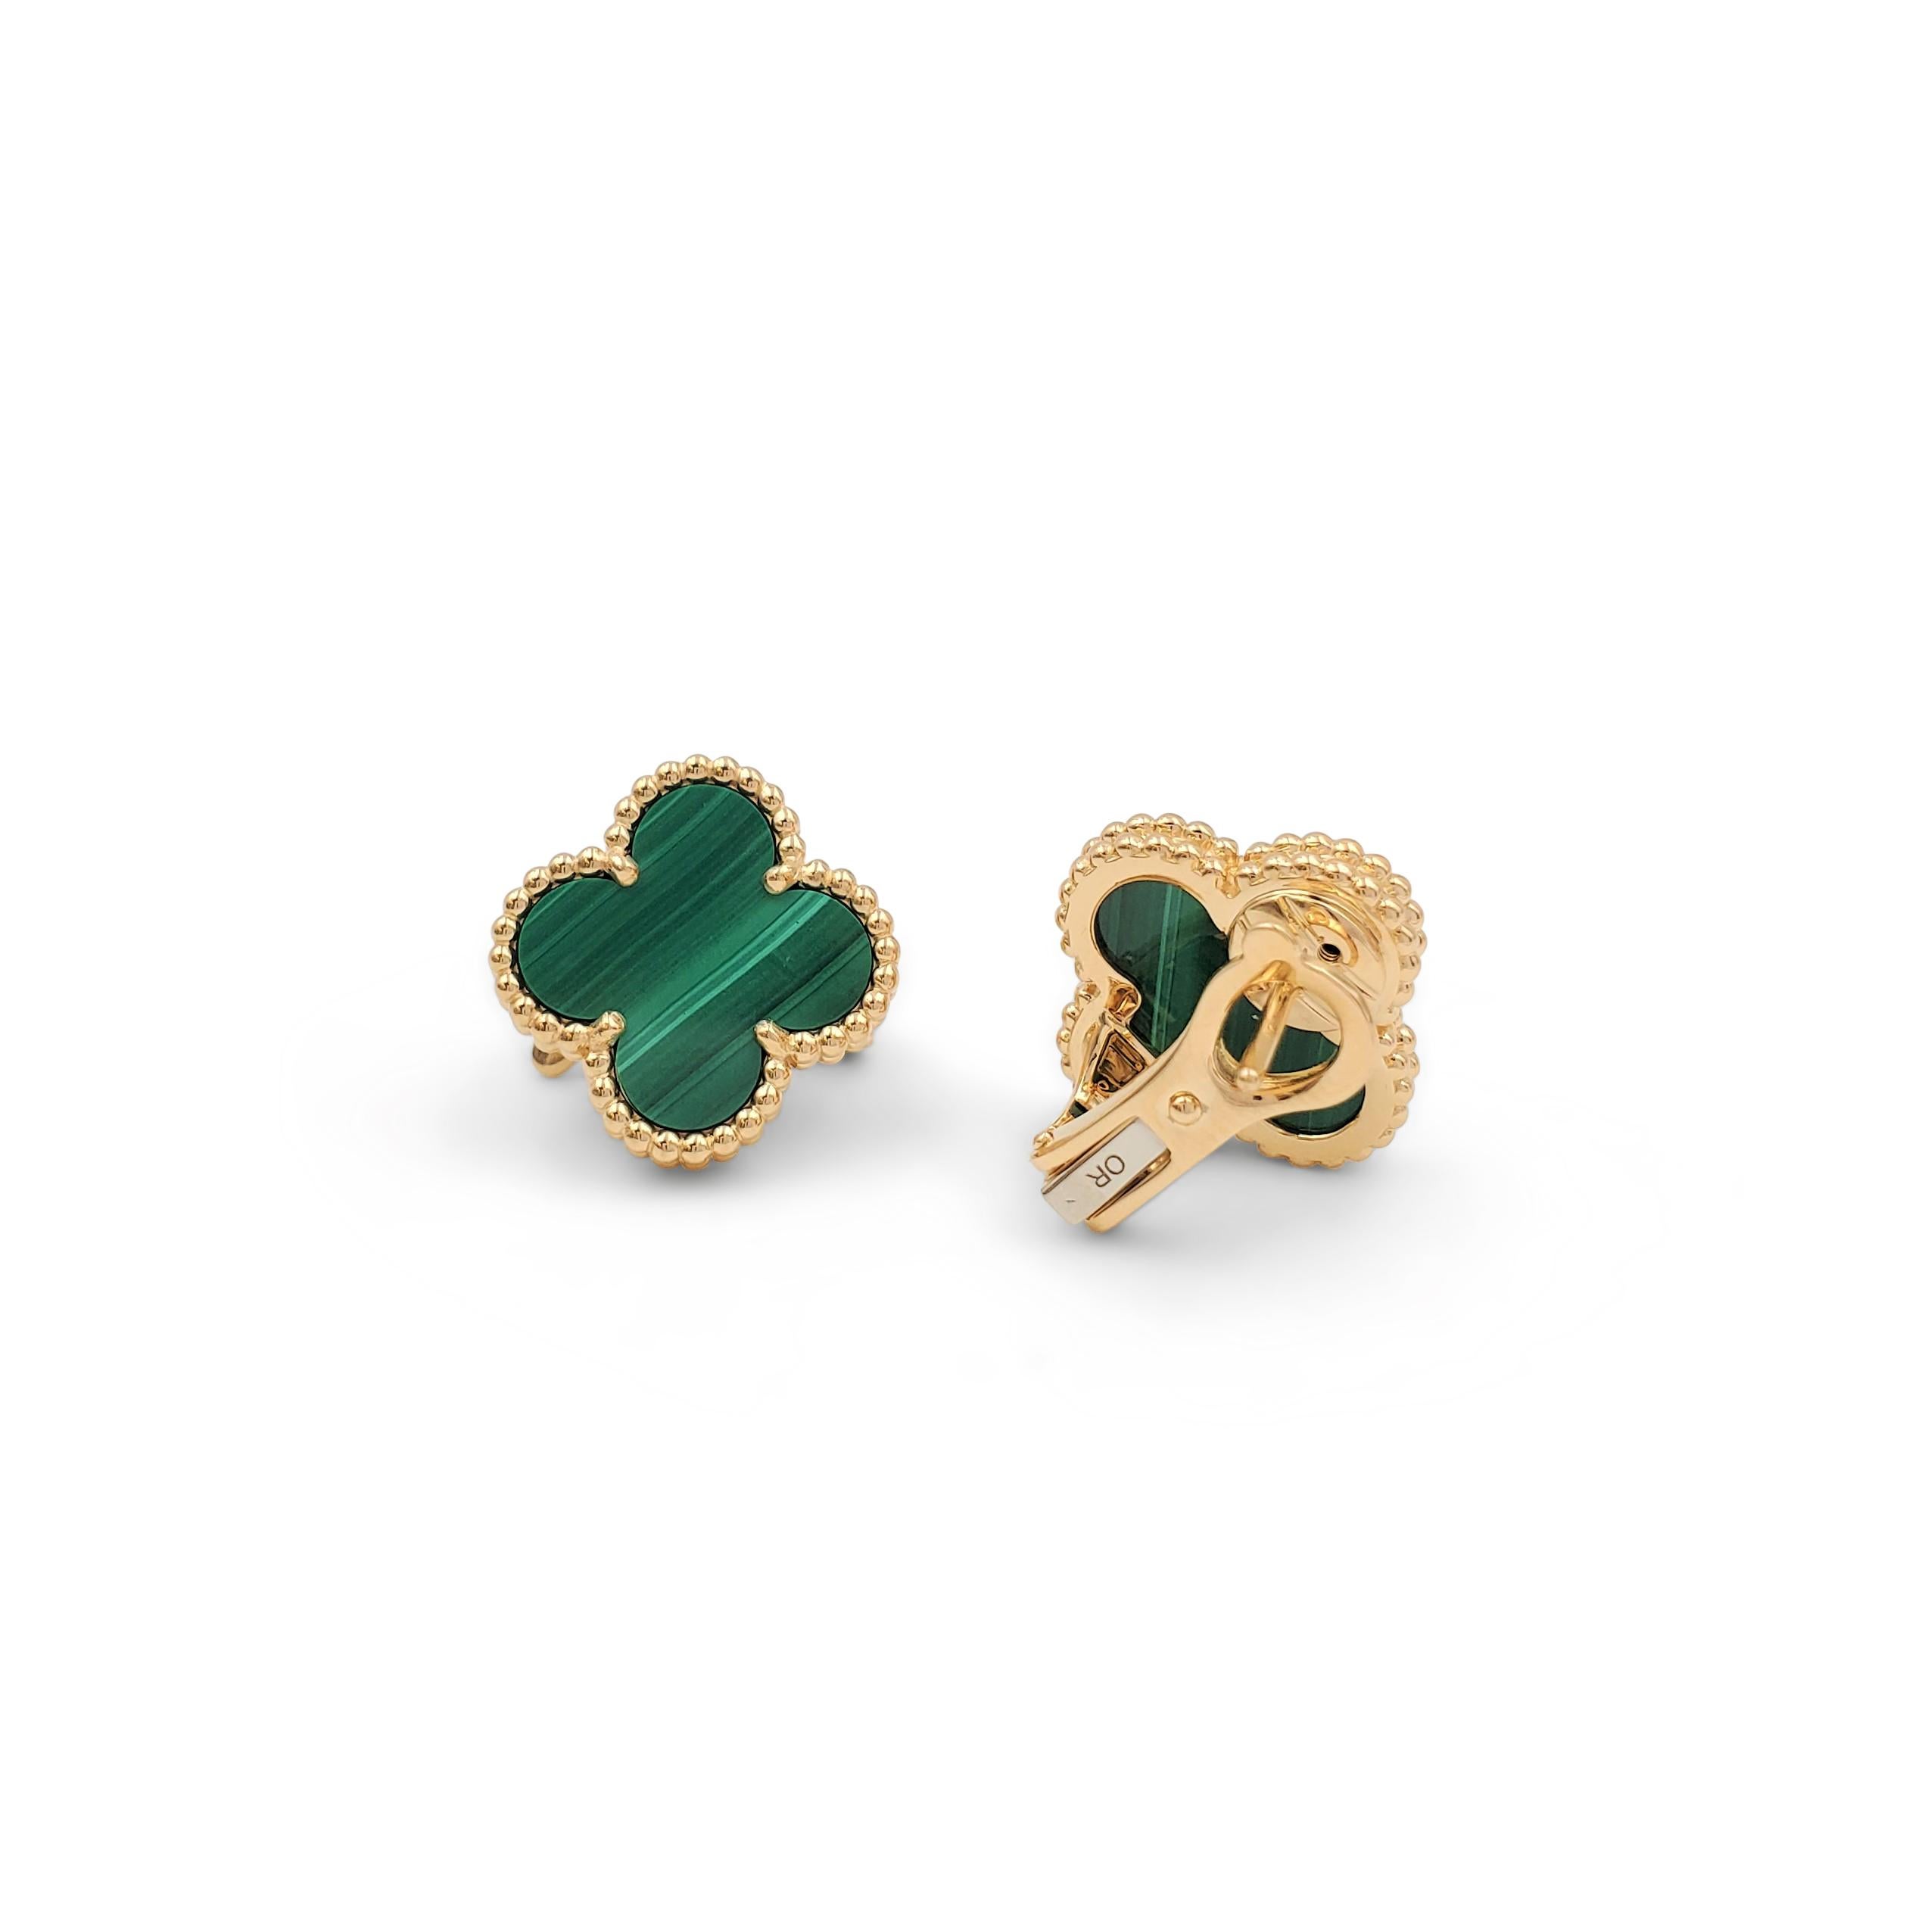 Authentic Van Cleef & Arpels 'Vintage Alhambra' earrings crafted in 18 karat yellow gold featuring the cover leaf-inspired motif in malachite. Signed VCA, Au750, with serial number and hallmarks. The earrings are presented with the original box and